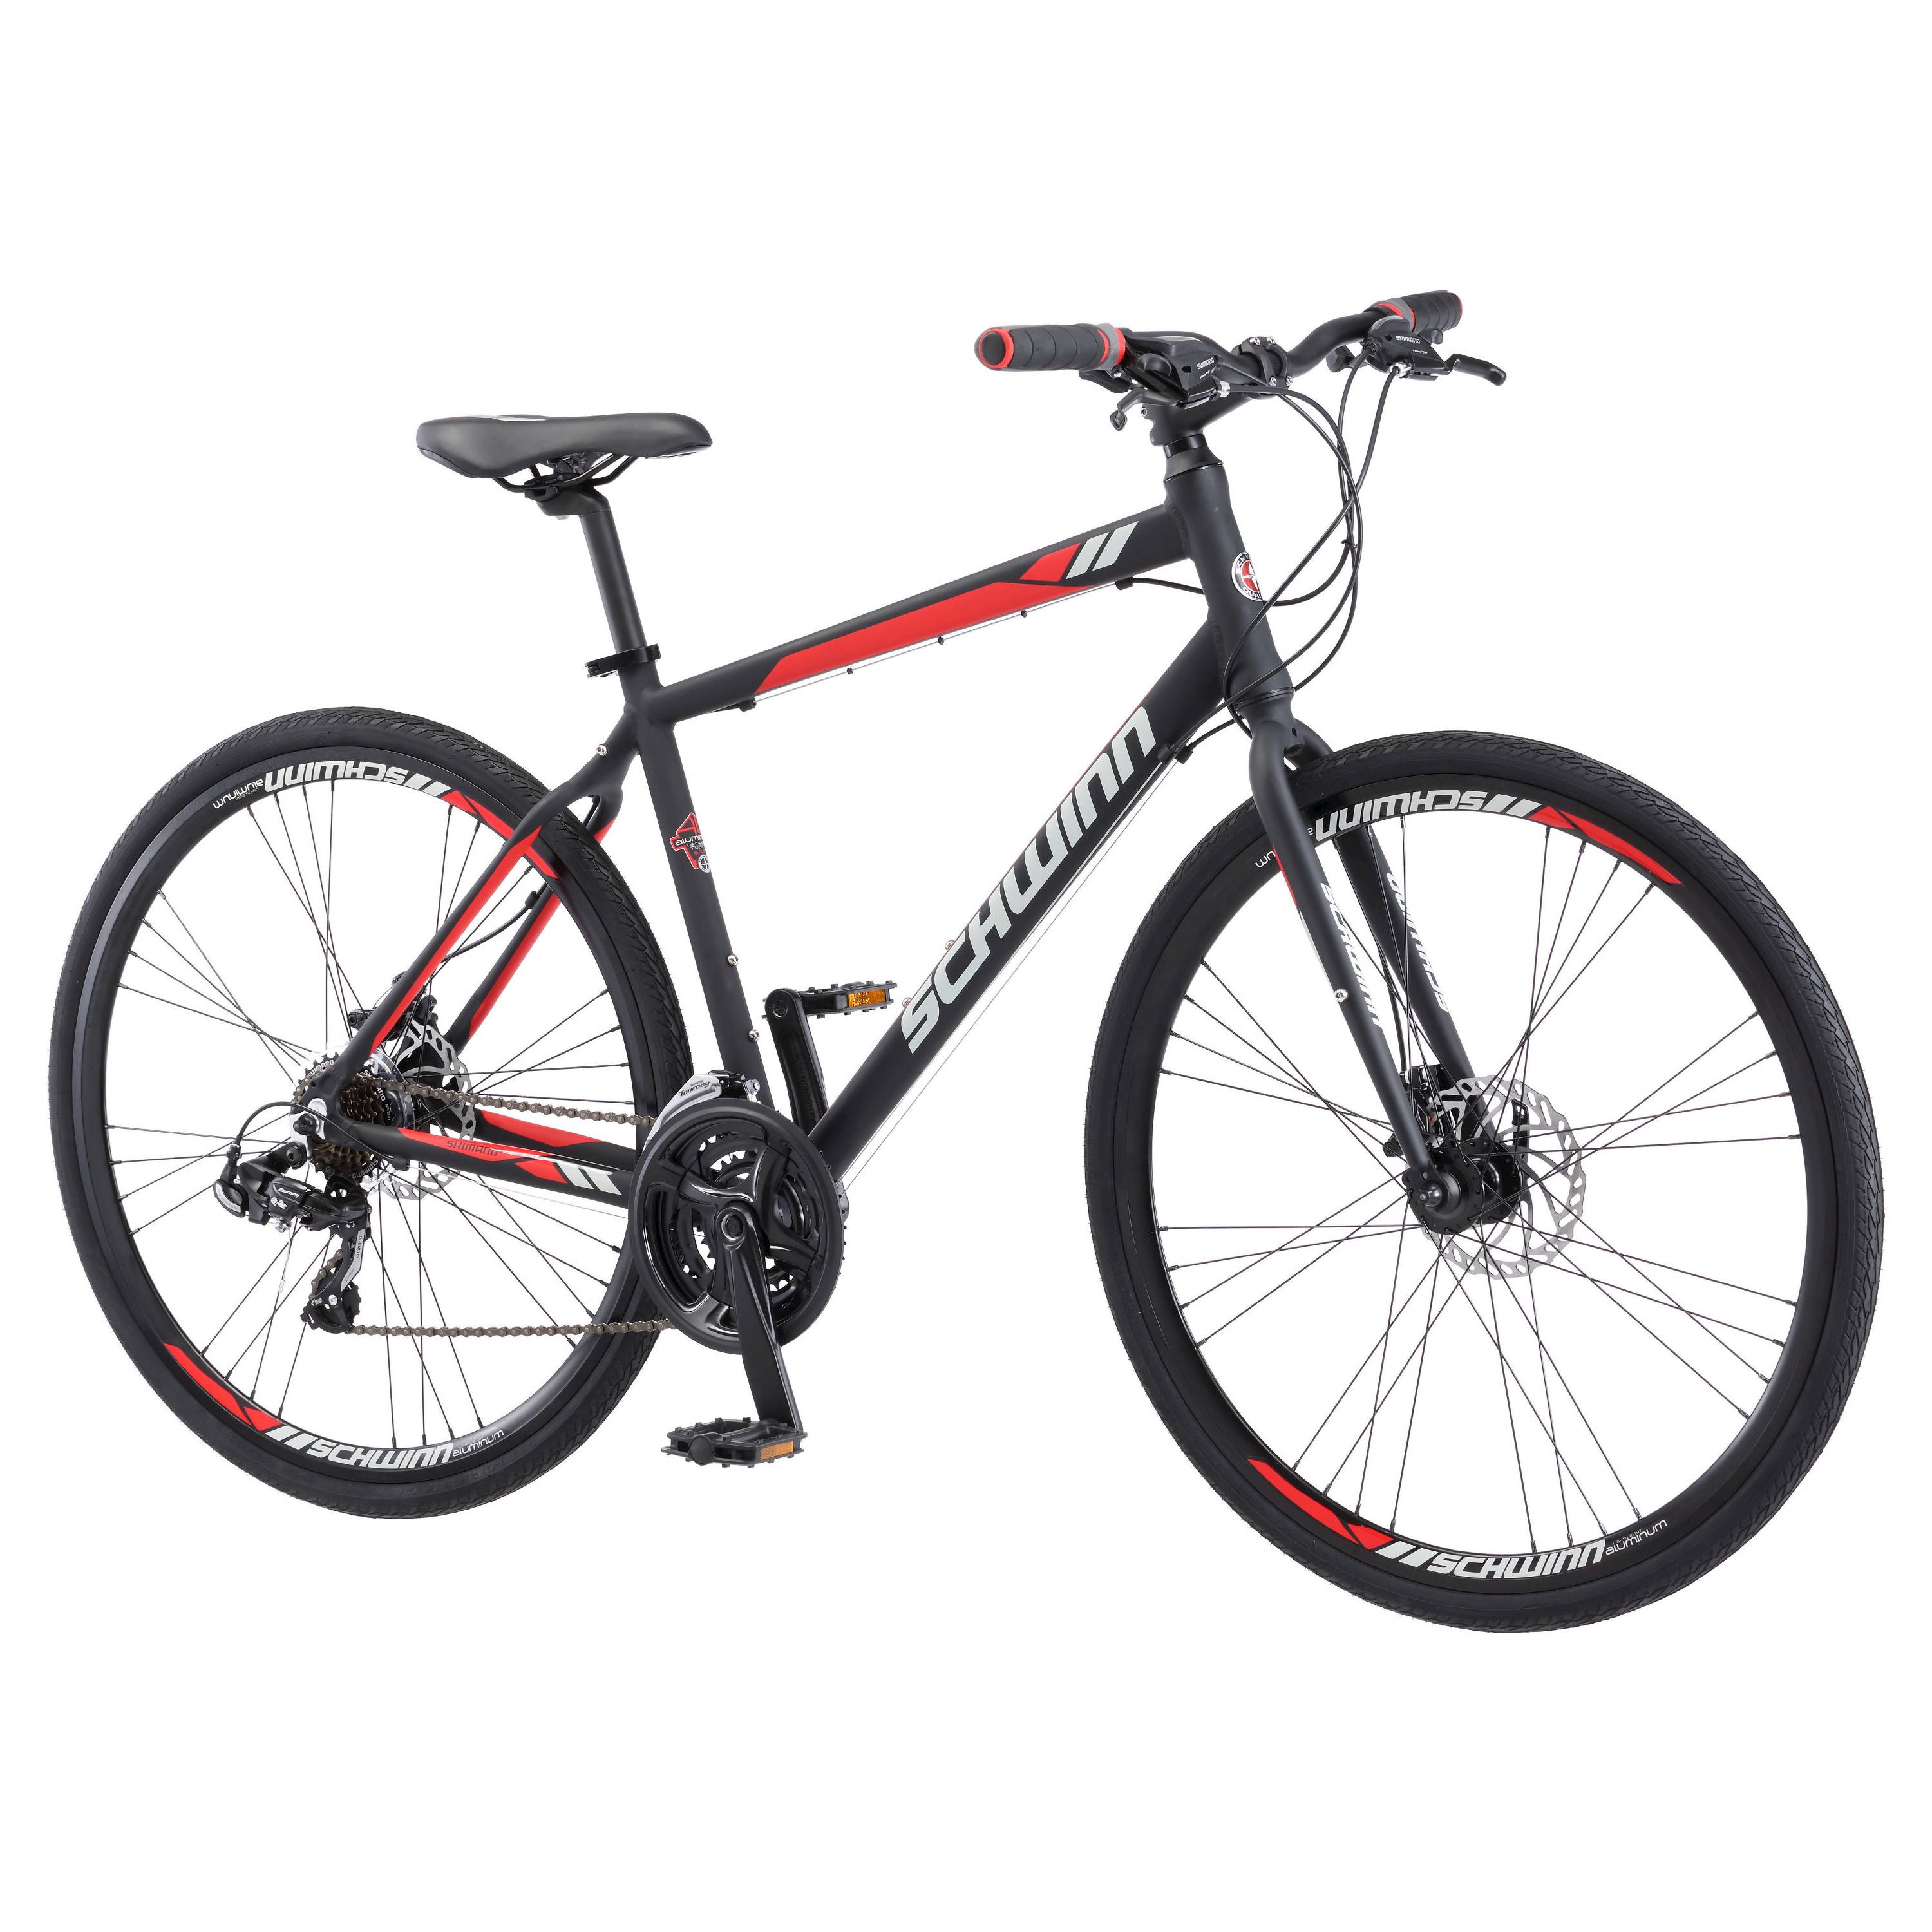 Schwinn Circuit 700c hybrid bike with disc brakes $217 (or $207 with REDcard) from Target with free shipping and in-store pickup